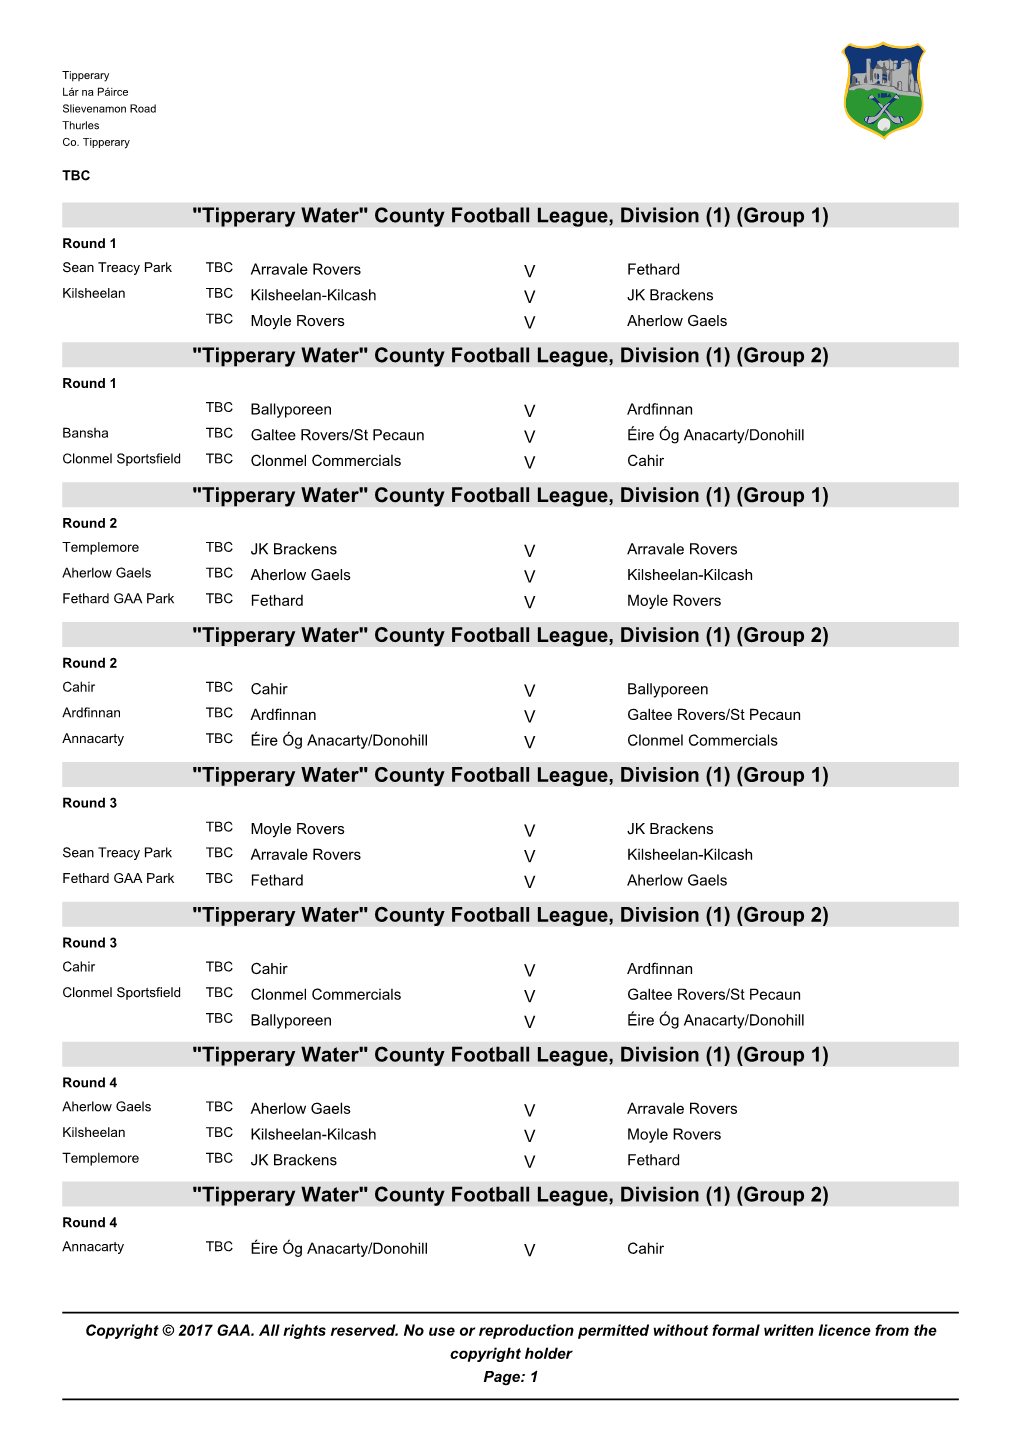 Tipperary Water County Football League Div 1 2017